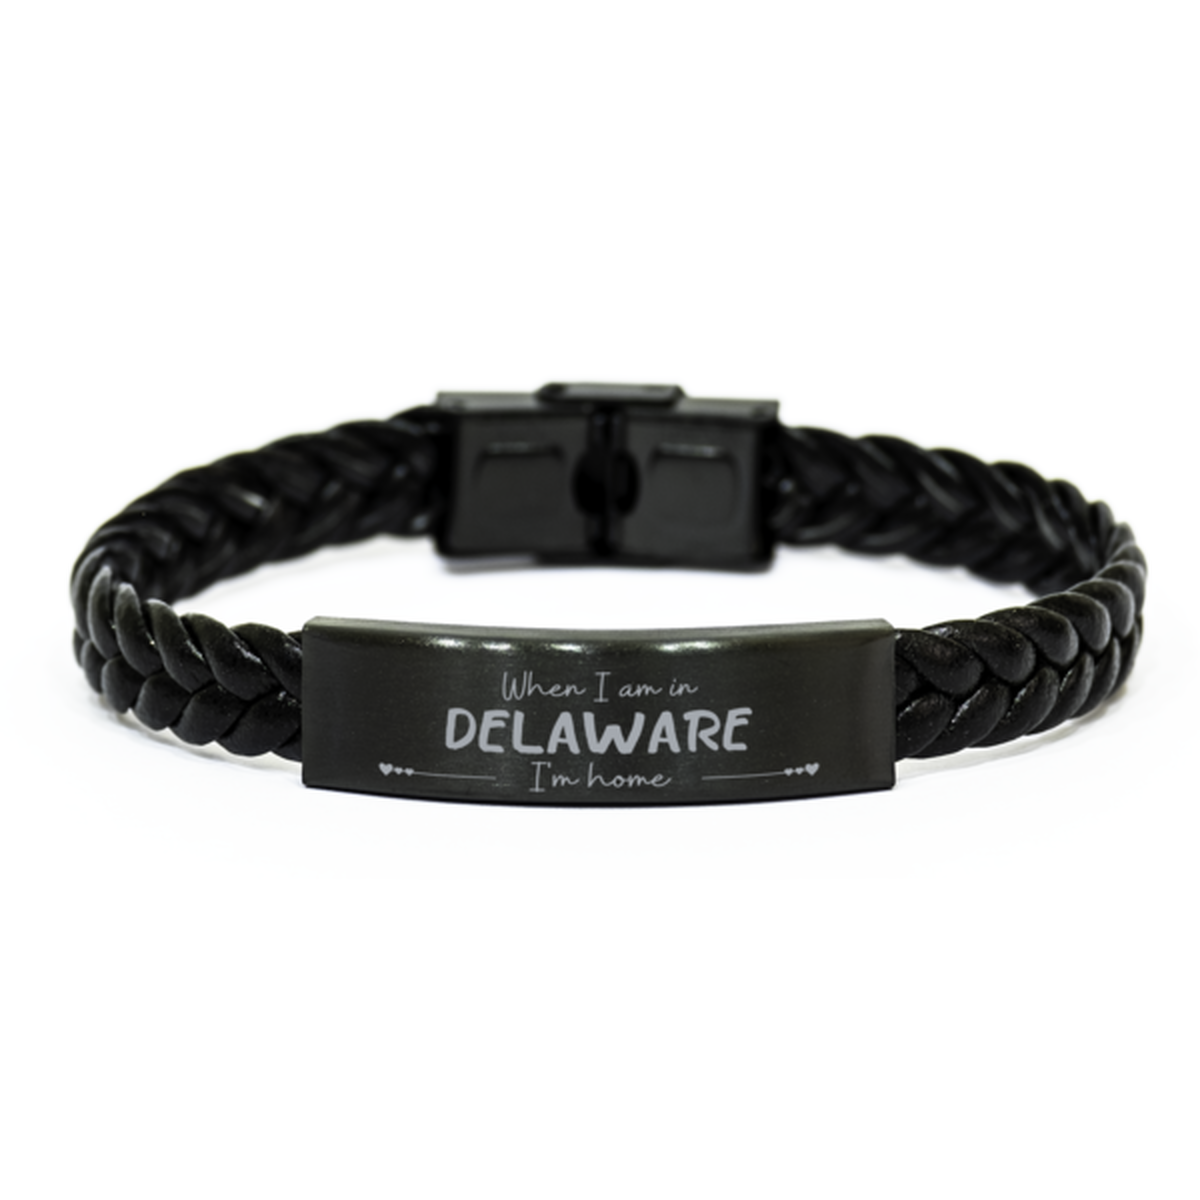 When I am in Delaware I'm home Braided Leather Bracelet, Cheap Gifts For Delaware, State Delaware Birthday Gifts for Friends Coworker